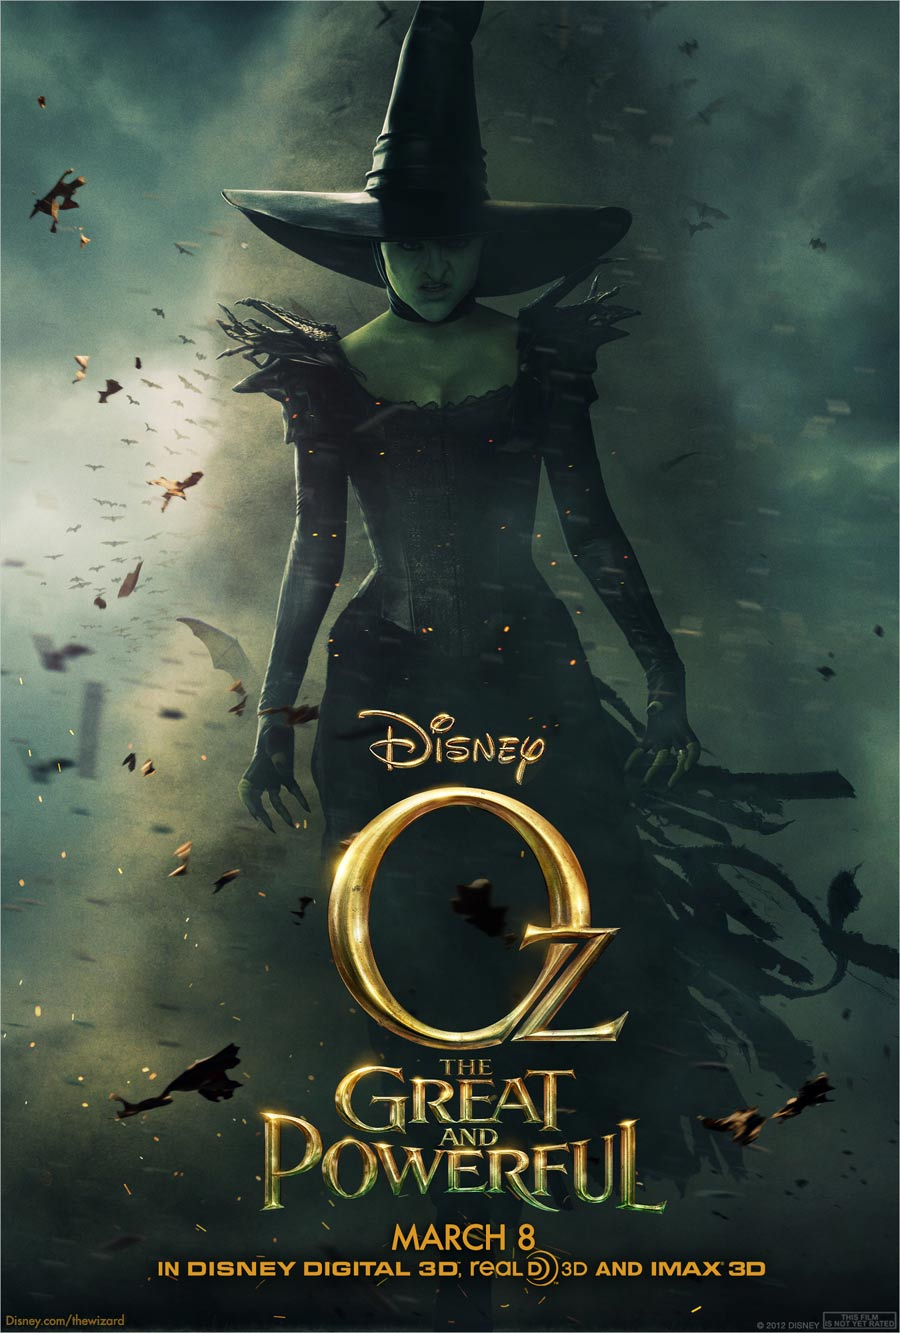 Oz: The Great and Powerful poster is a little intimidating